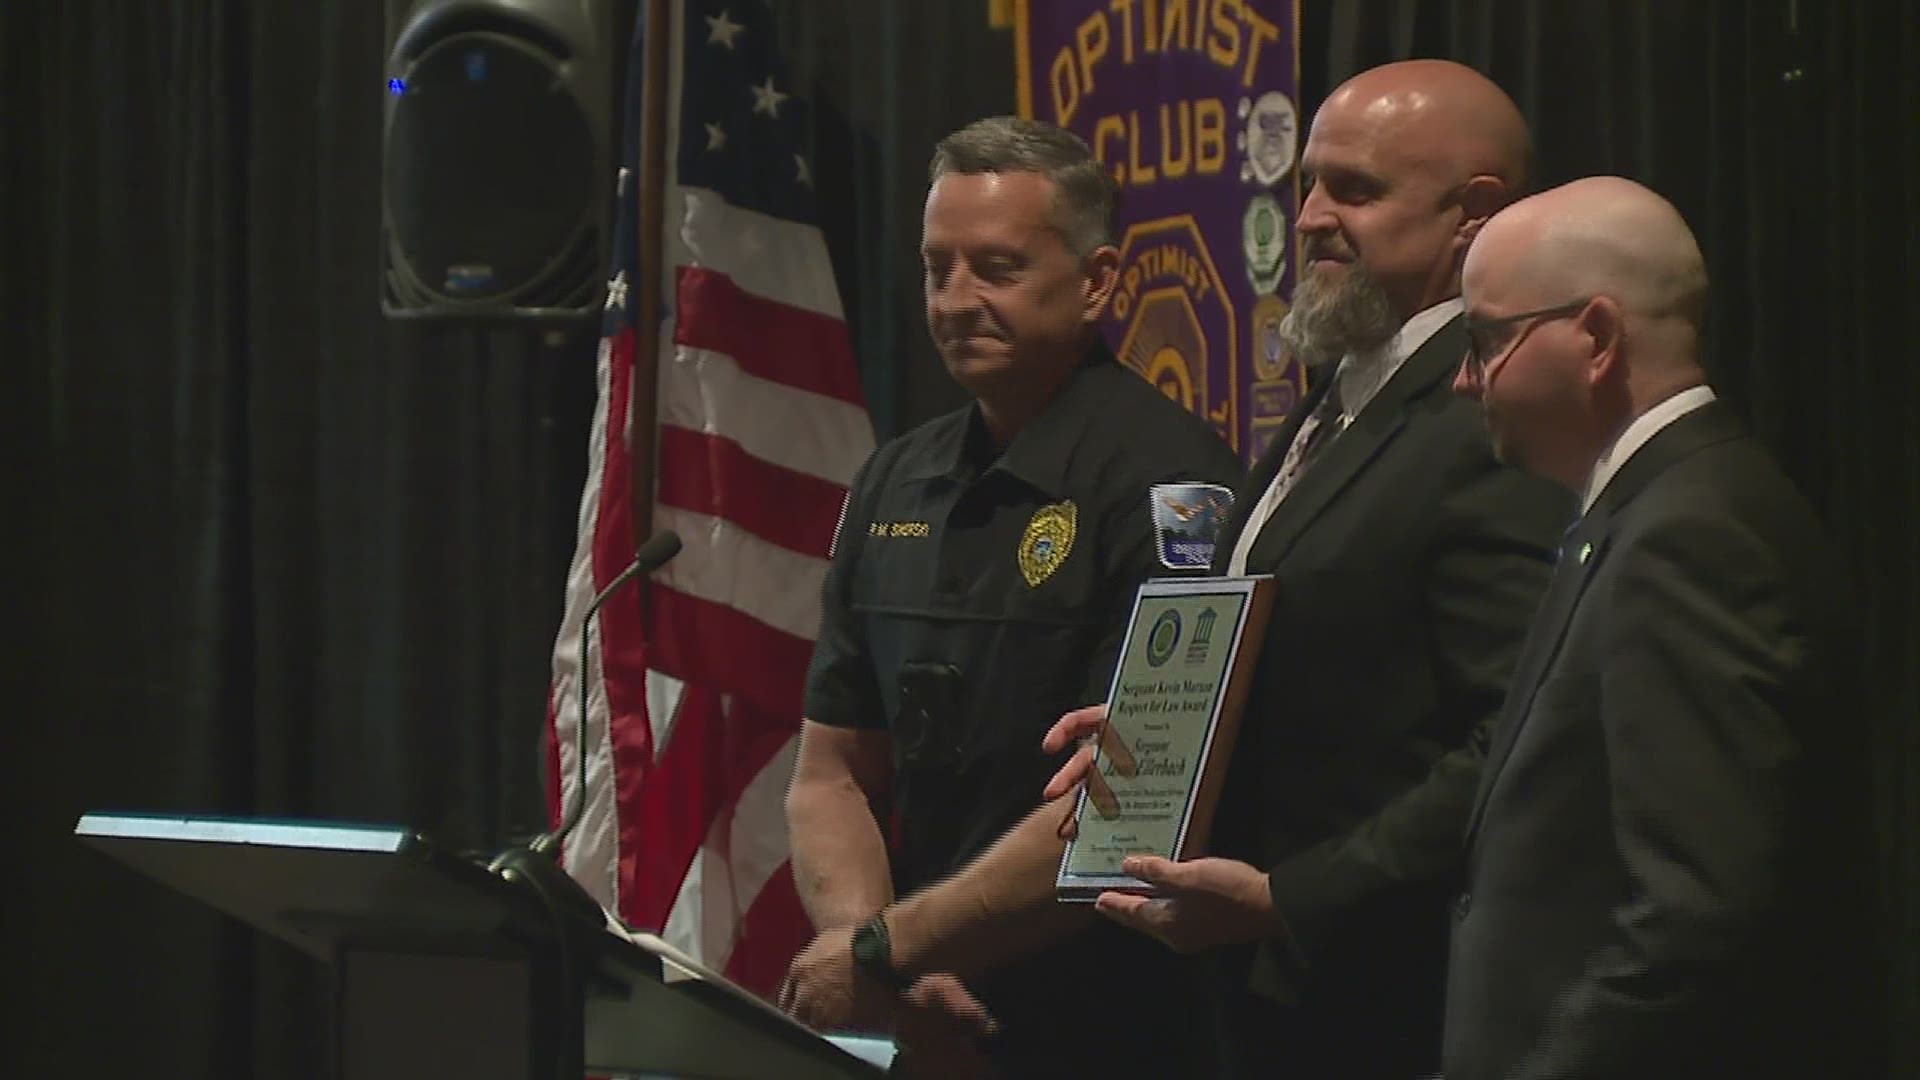 Sgt. Jason Ellerbach was honored by the organization for his 10-year leadership of the  Criminal Investigation Division and great respect among his colleagues.